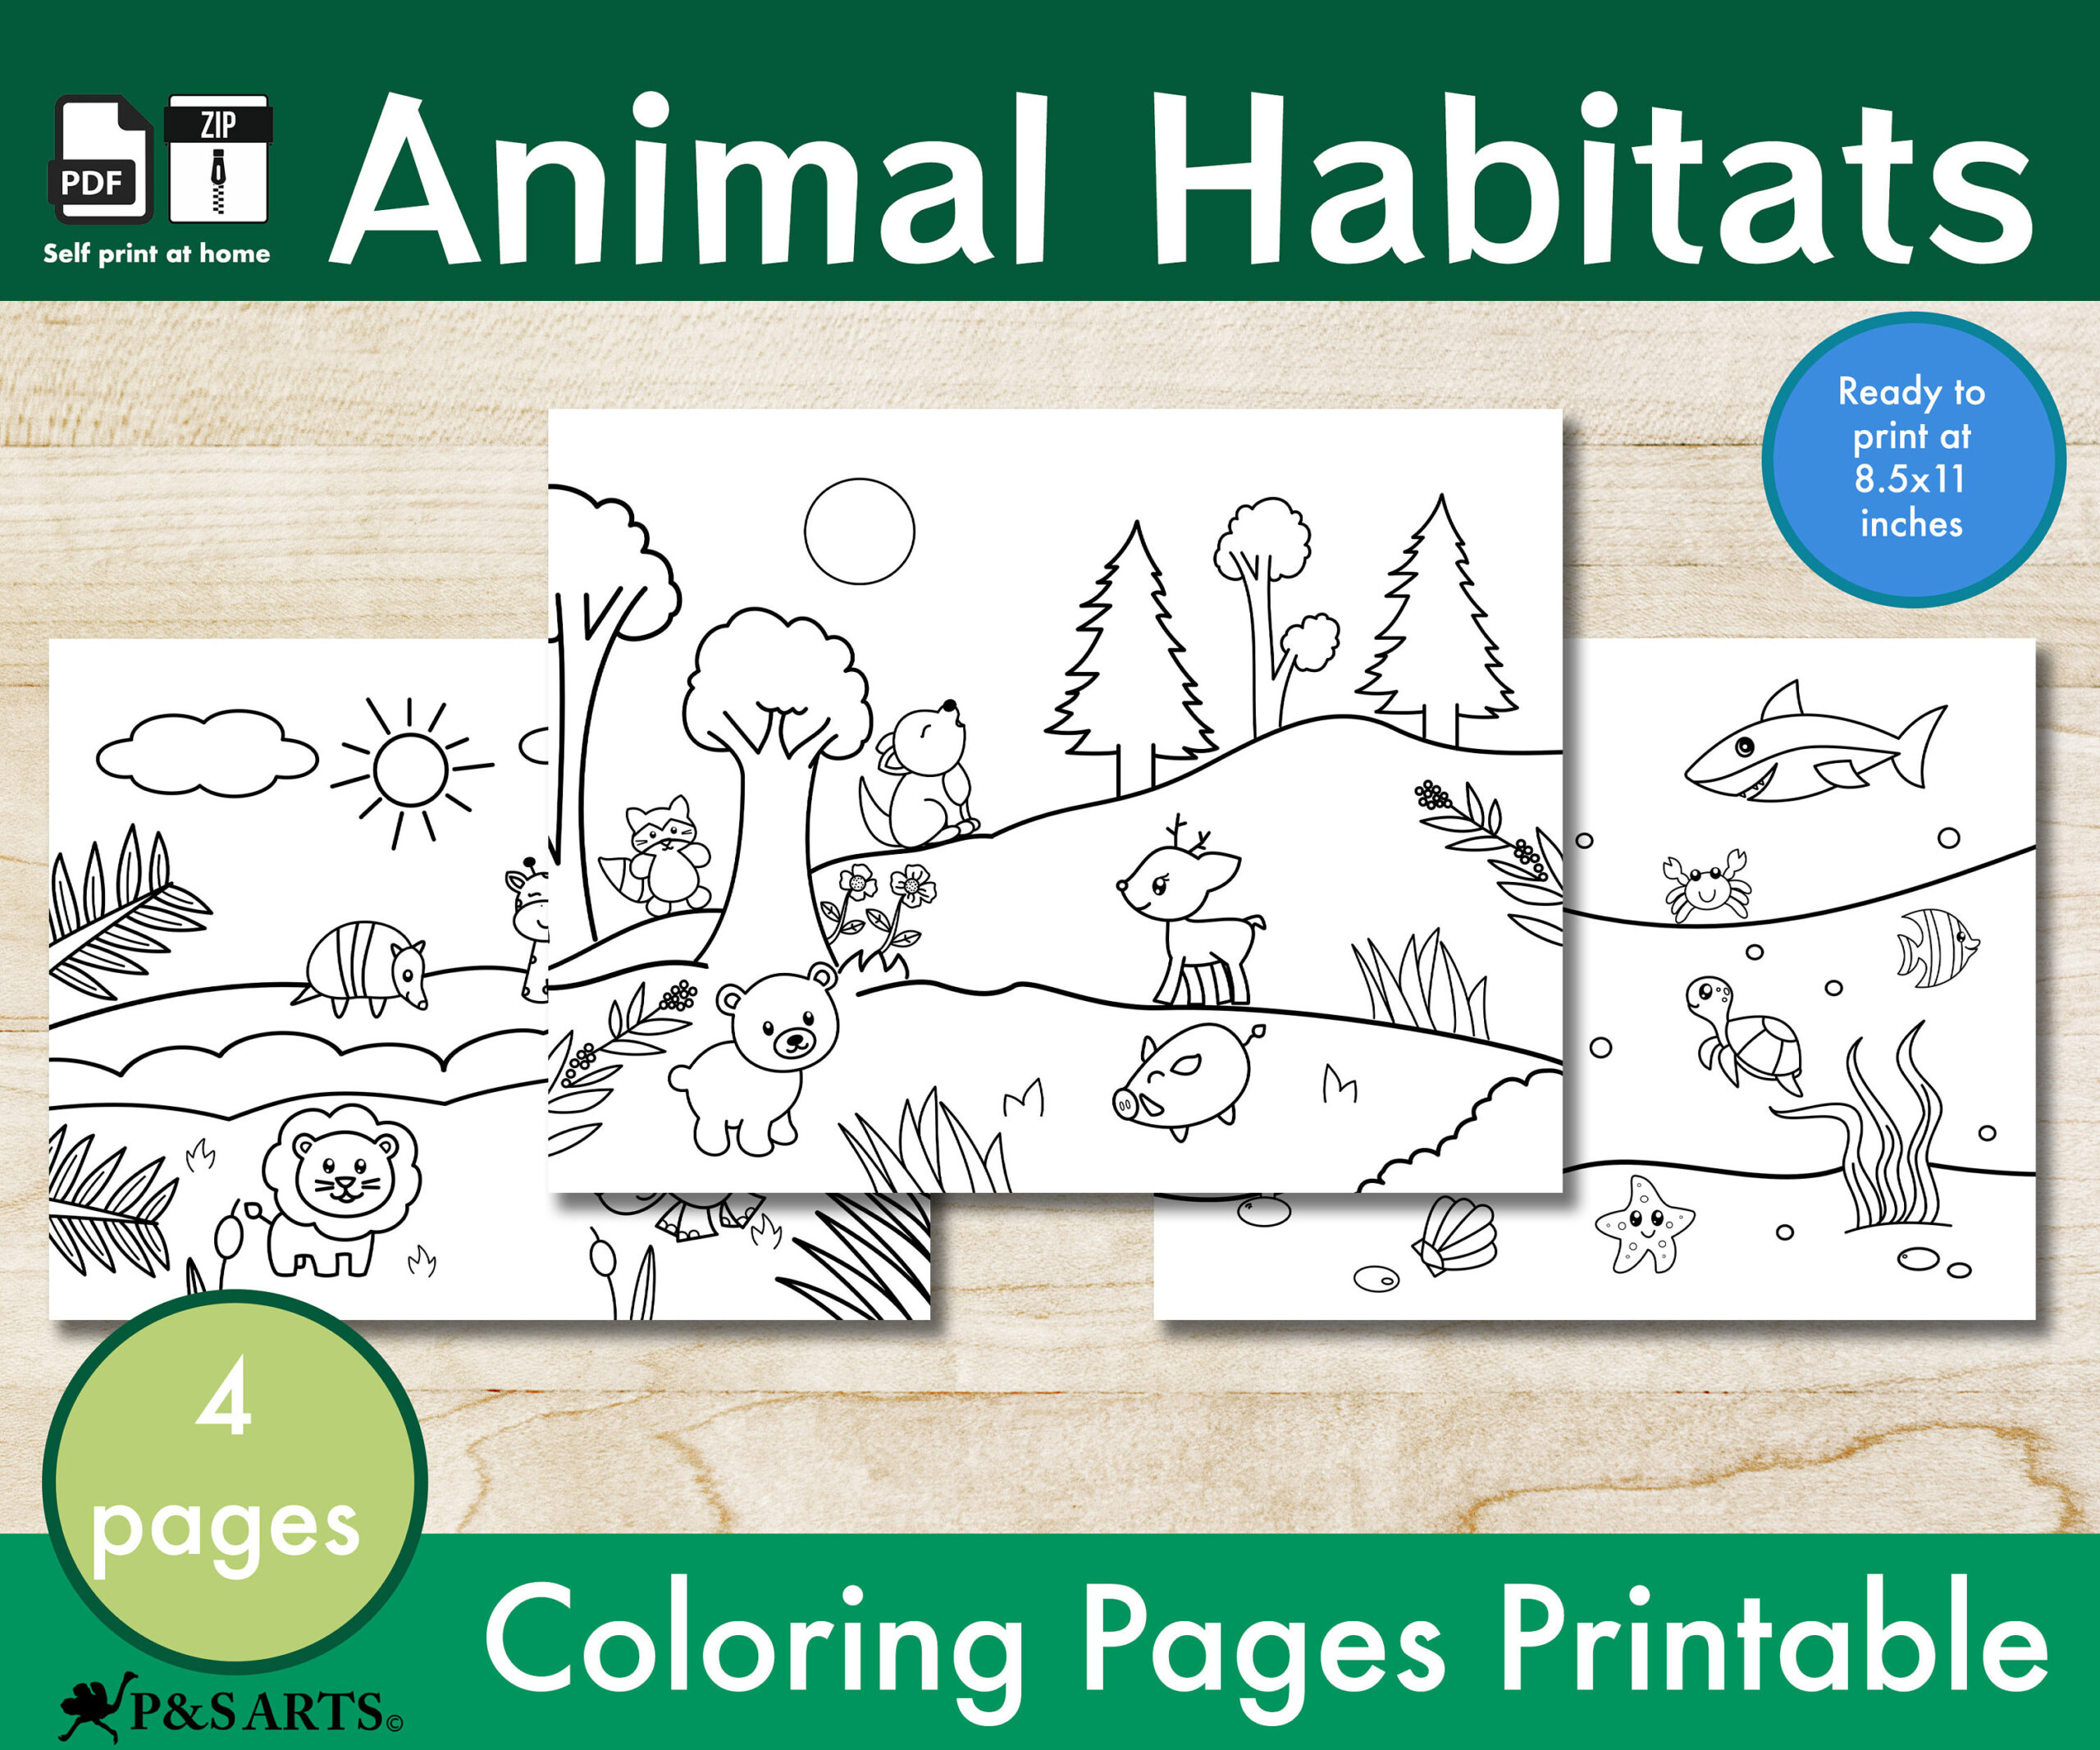 Animal Habitats Coloring Pages Printable, For Toddlers And Kids - Animal Habitat Printable